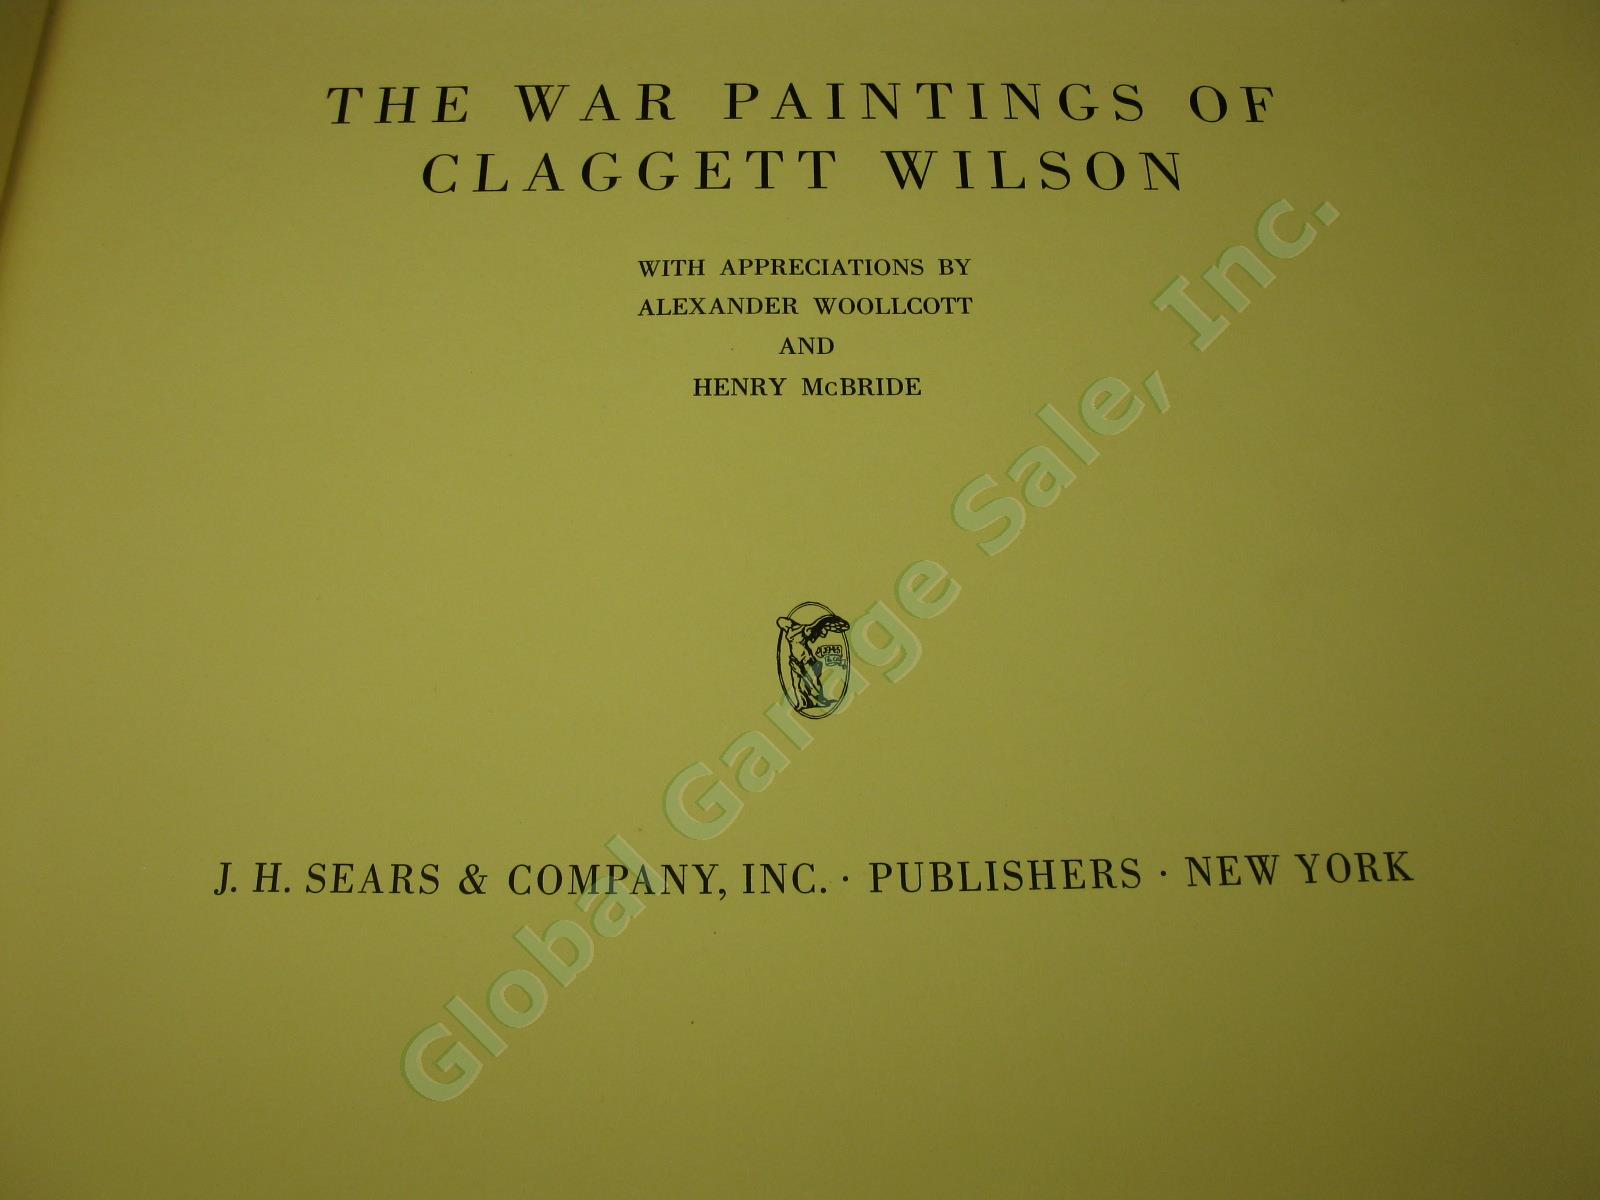 The War Paintings of Claggett Wilson Rare Vtg Antique 1928 Hardcover Book No DJ 4